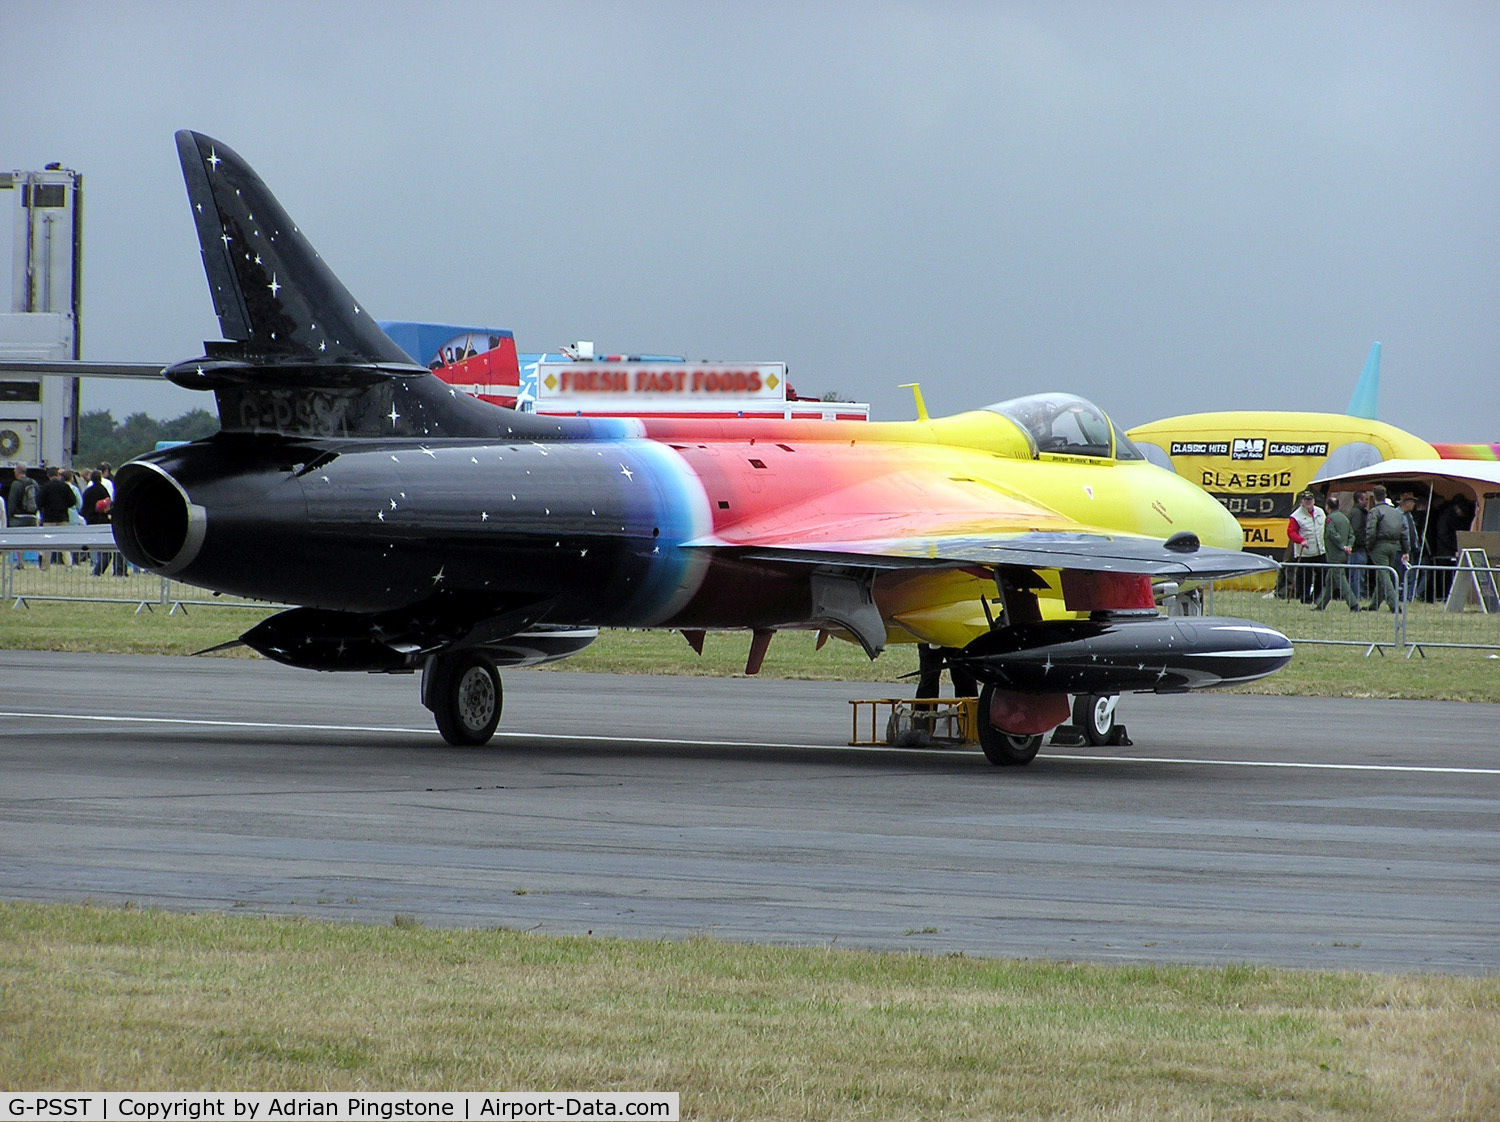 G-PSST, 1959 Hawker Hunter F.58A C/N HABL-003115, A privately-owned Hawker Hunter F.58 (G-PSST, “Miss Demeanour”) powered by one Rolls Royce Avon Mk 207, at Kemble airfield, Kemble, Gloucestershire, England in June 2004